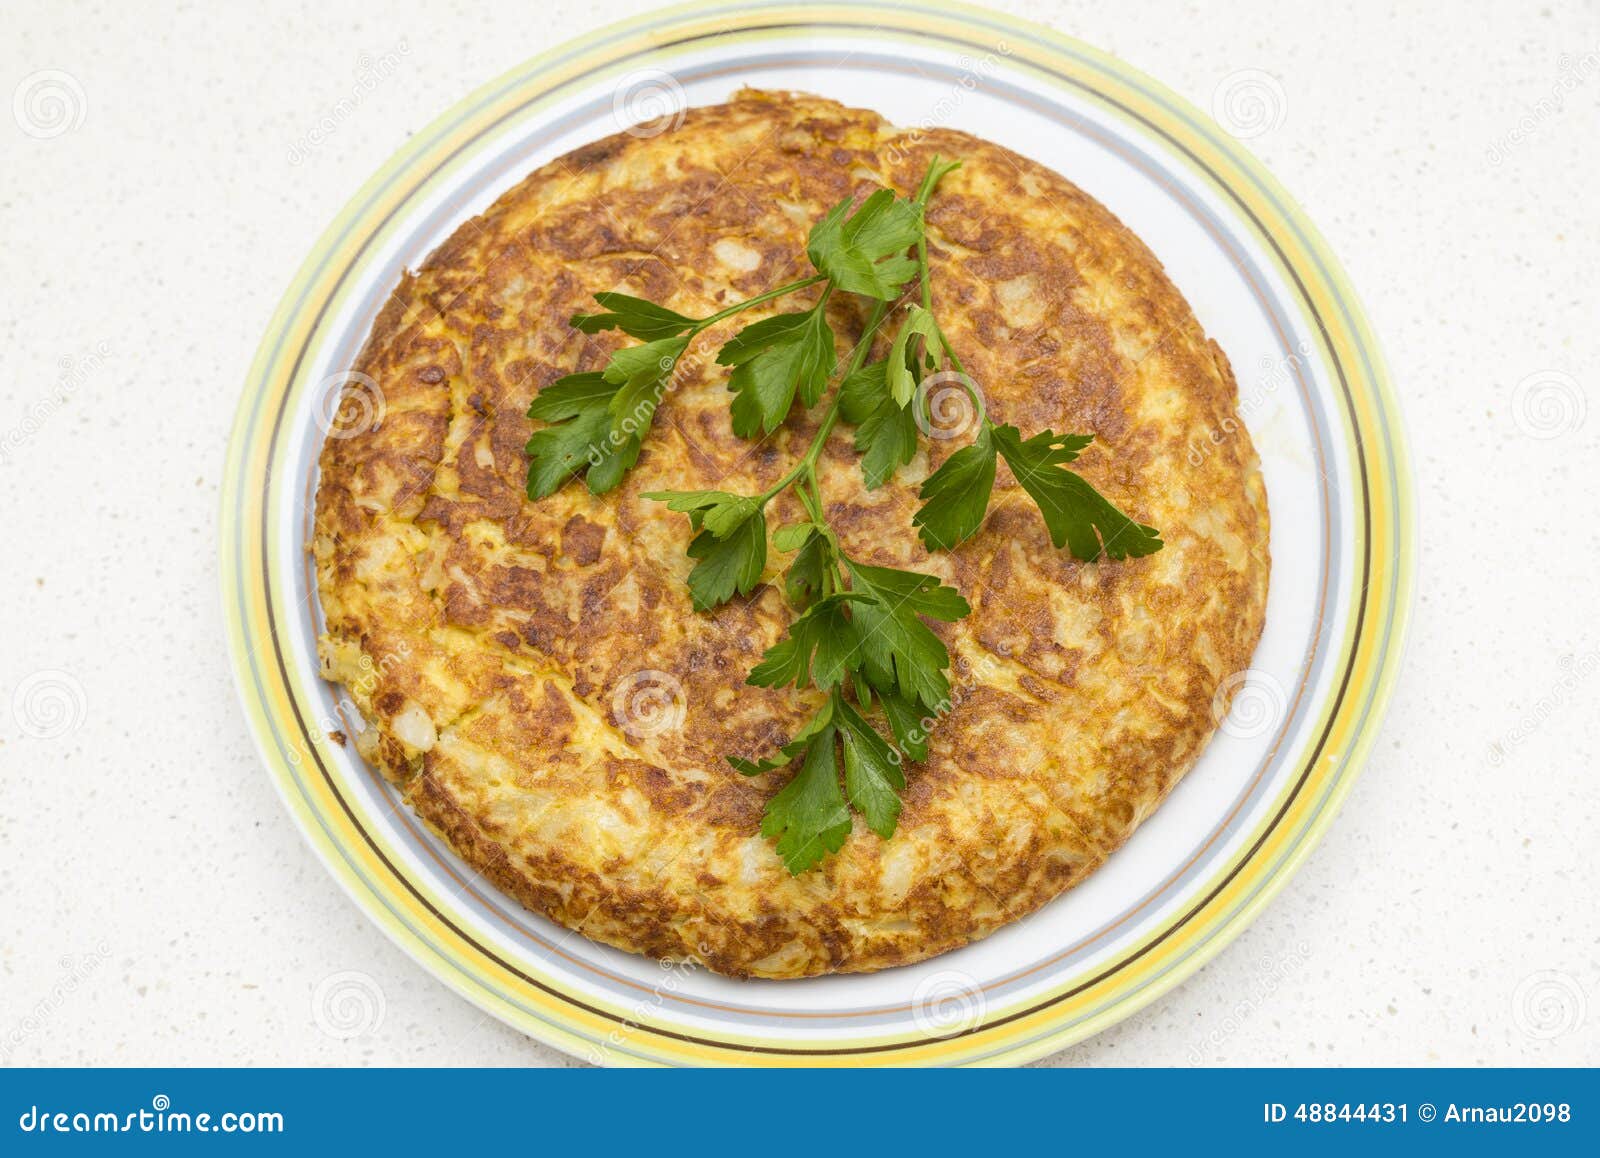 spanish omelette with parsley